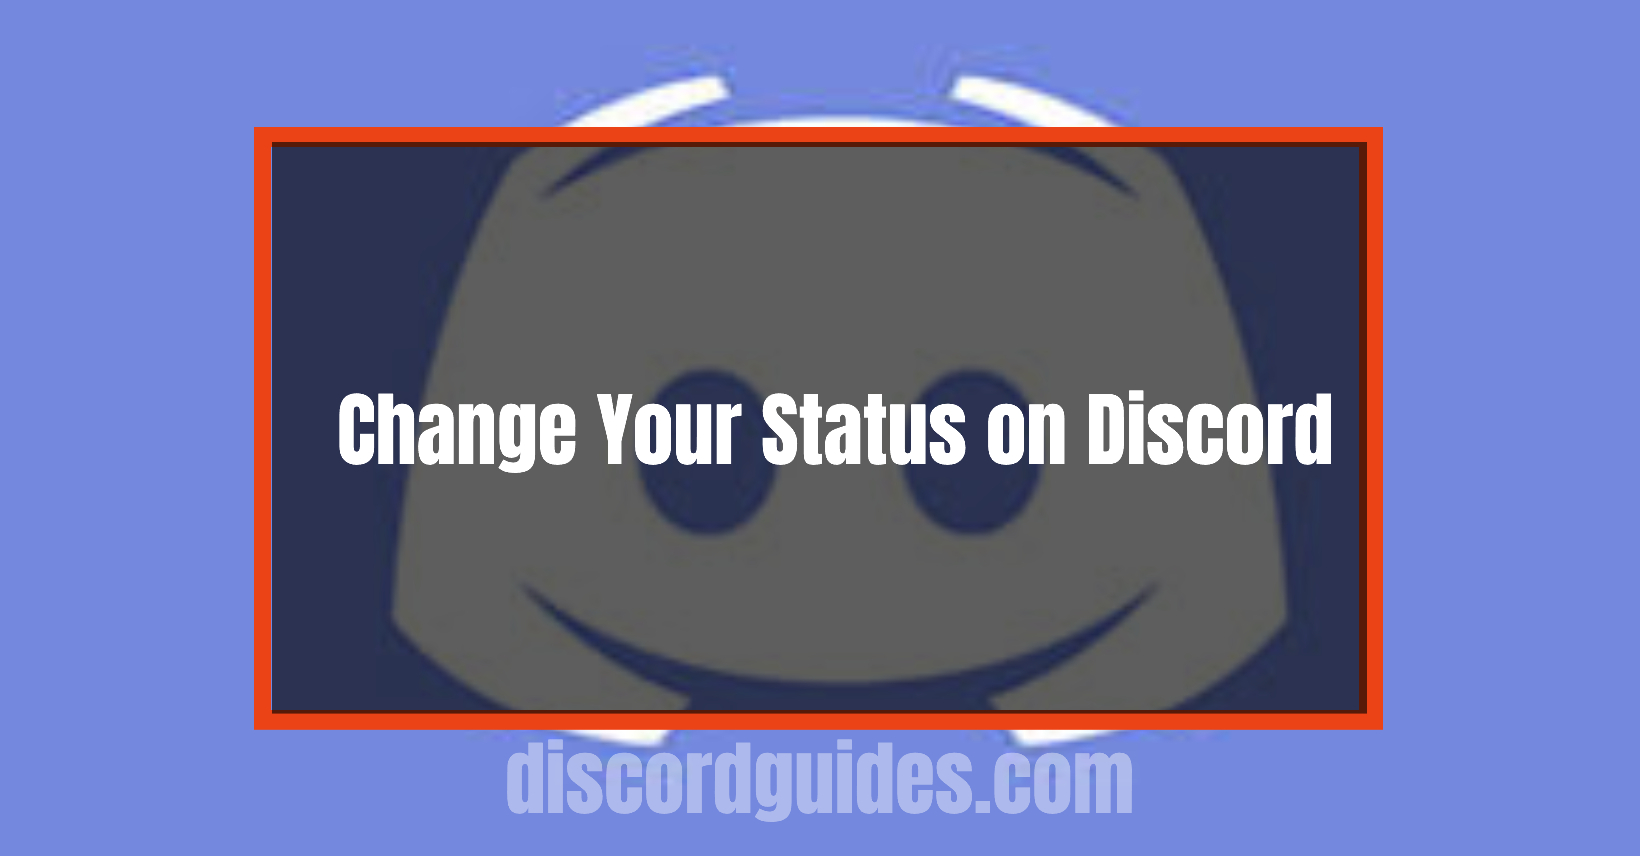 How to Change Your Status on Discord? [Guide]